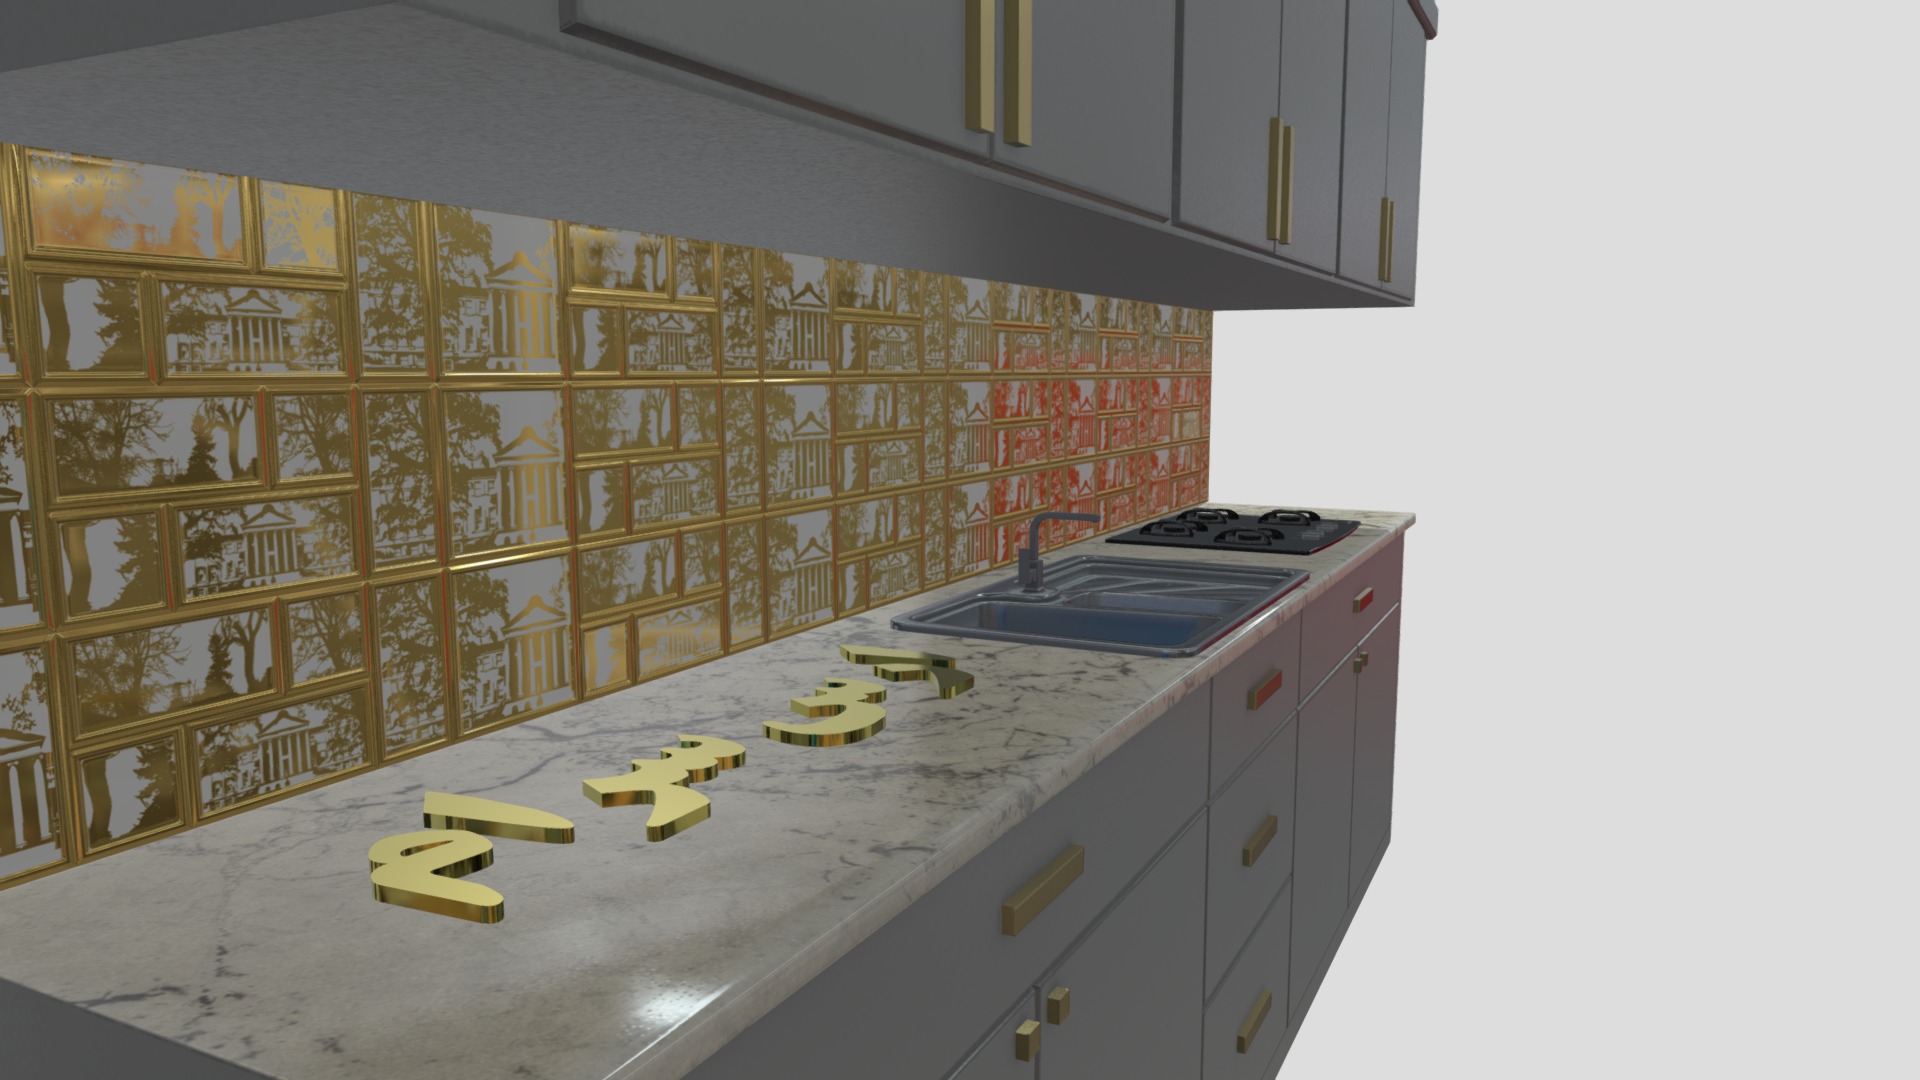 3D model geranada  WG  Kitchen - This is a 3D model of the geranada  WG  Kitchen. The 3D model is about a kitchen with a large display of yellow and white tiles.